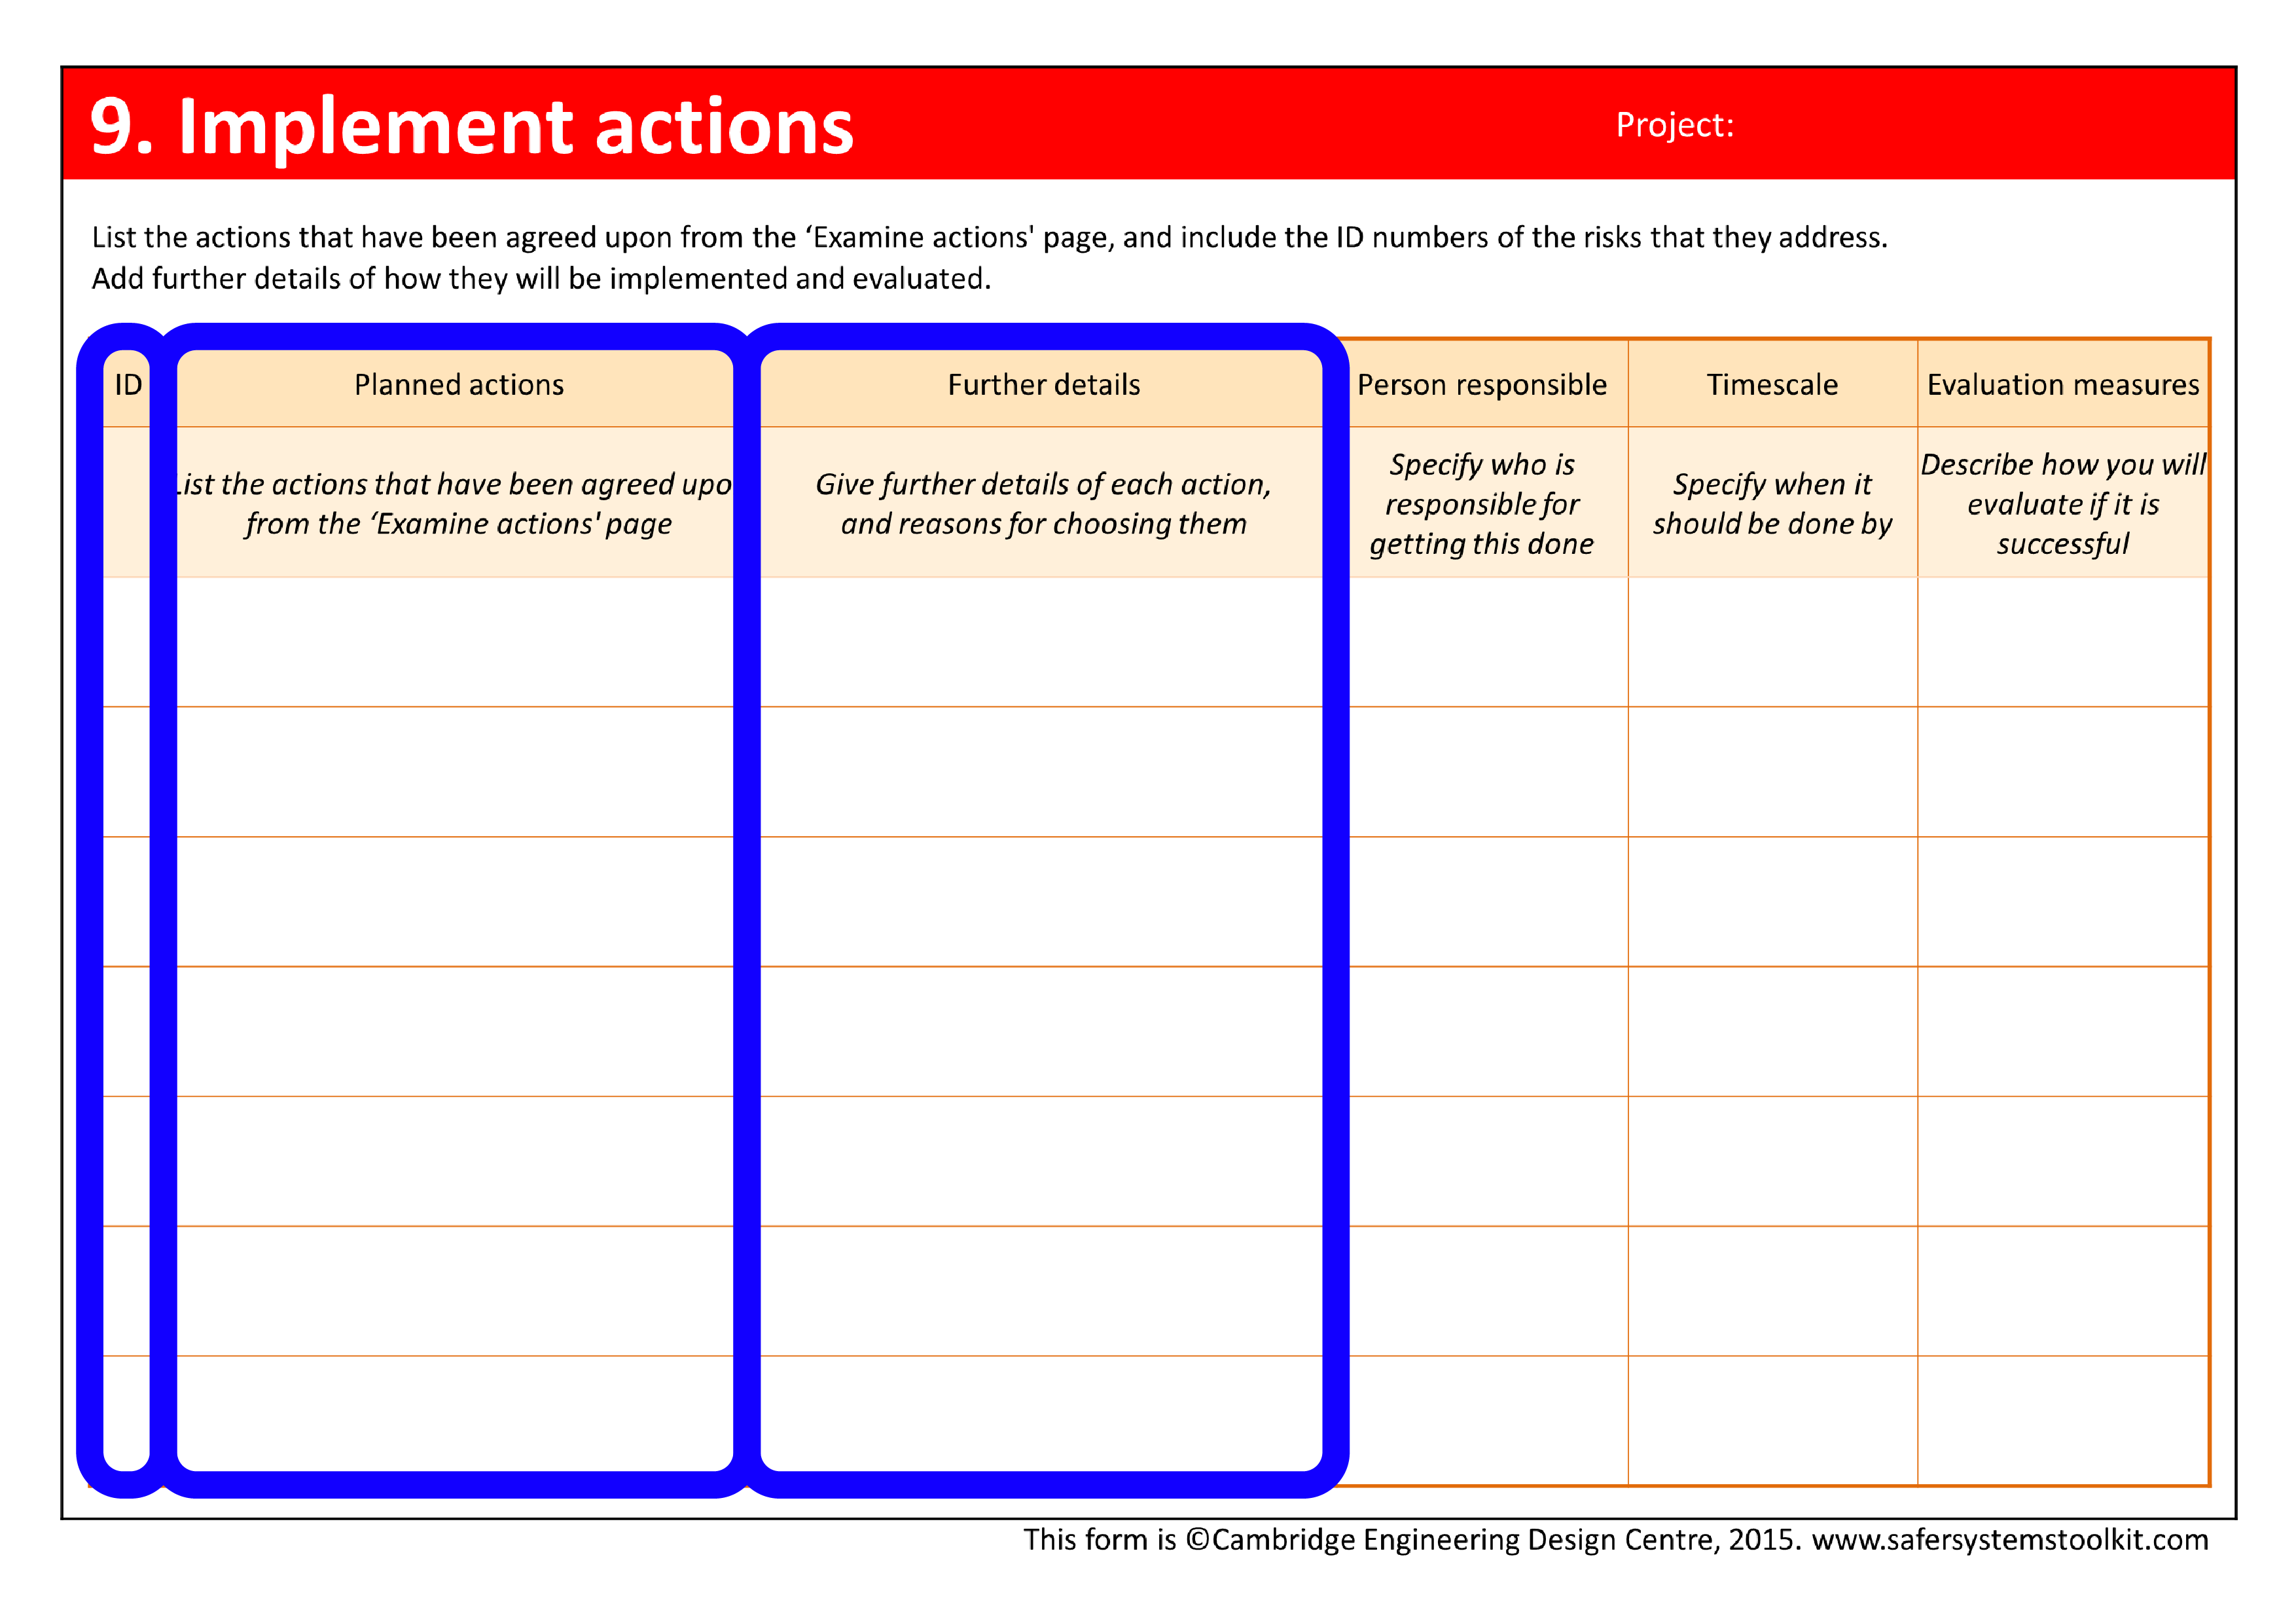 Screenshot of Implement actions page of the assessment form